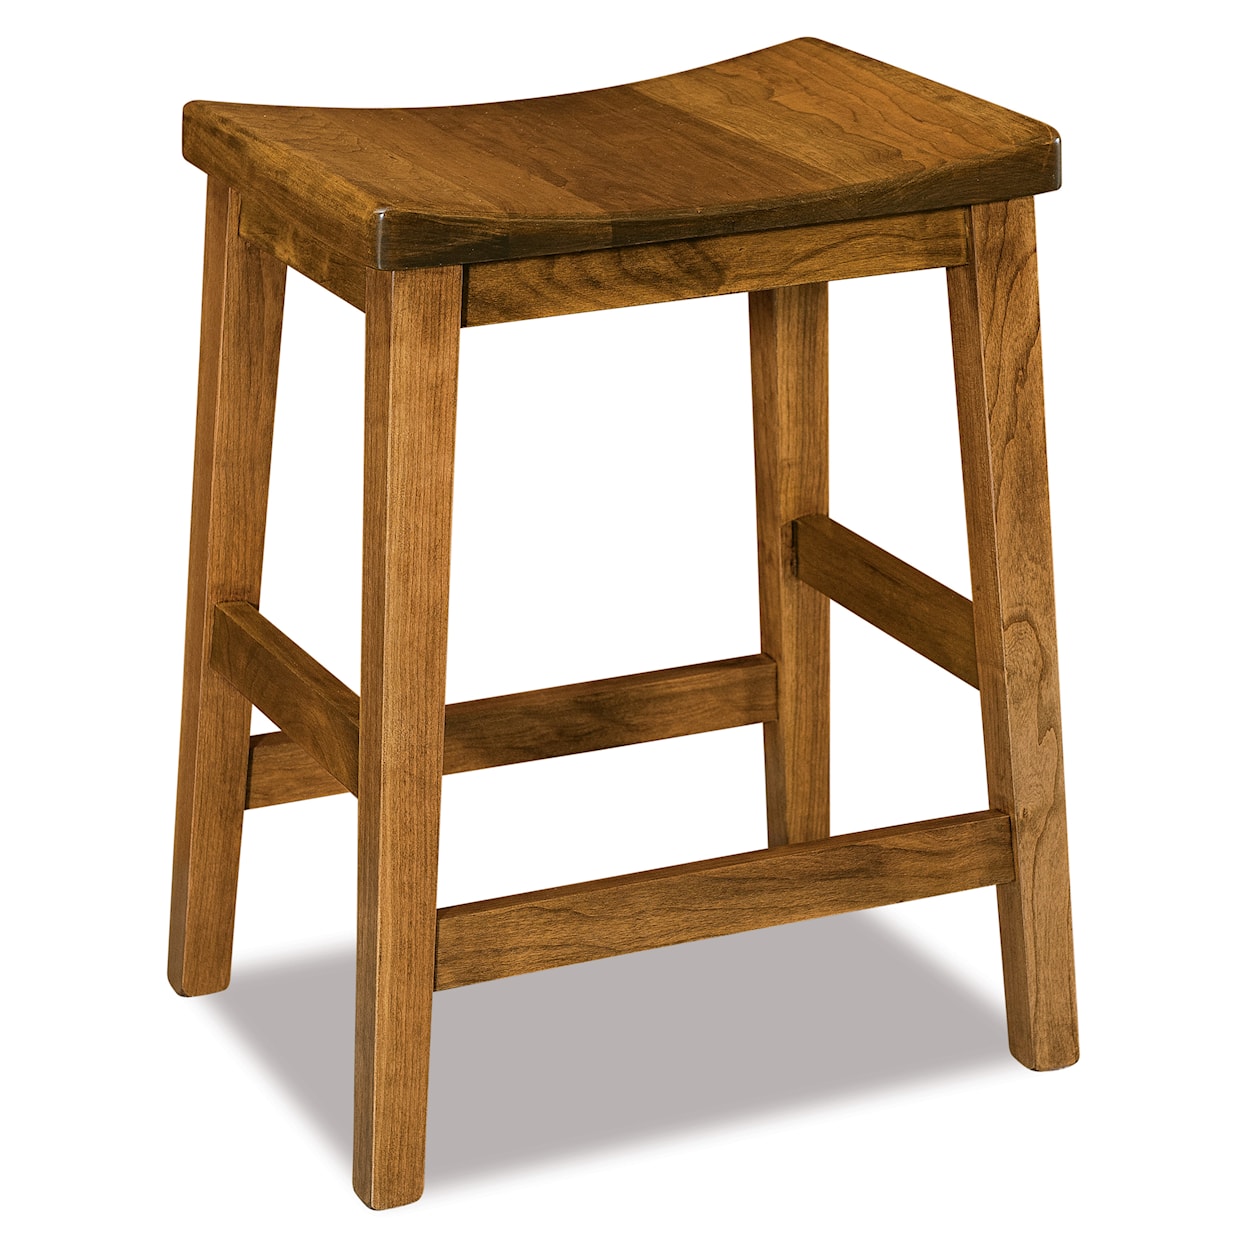 Archbold Furniture Bob Timberlake Counter-Height Wall Table with Stools